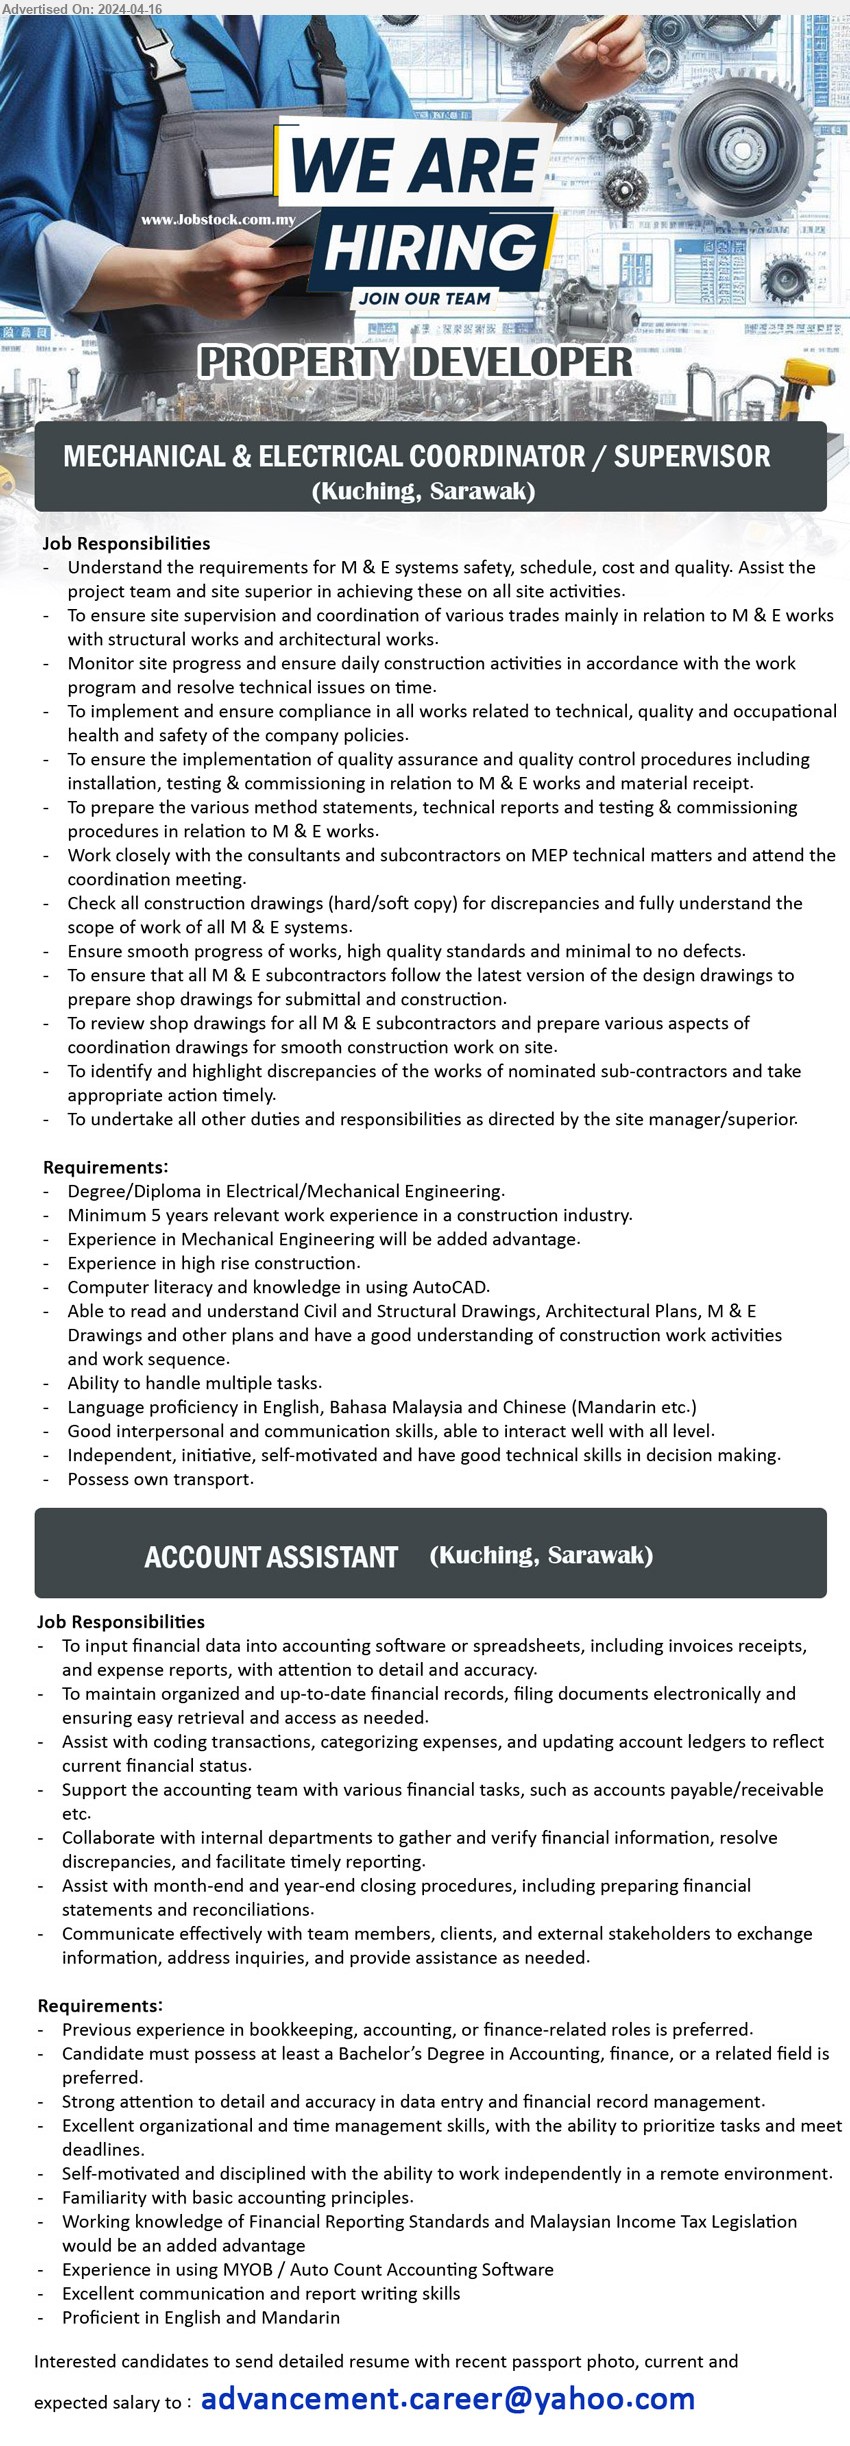 ADVERTISER (Property Developer) - 1. MECHANICAL & ELECTRICAL COORDINATOR / SUPERVISOR (Kuching), Degree/Diploma in Electrical/Mechanical Engineering, Minimum 5 years relevant work experience in a construction industry.,...
2. ACCOUNT ASSISTANT (Kuching), Bachelor’s Degree in Accounting, finance, Experience in using MYOB / Auto Count Accounting Software..
Email resume to ...